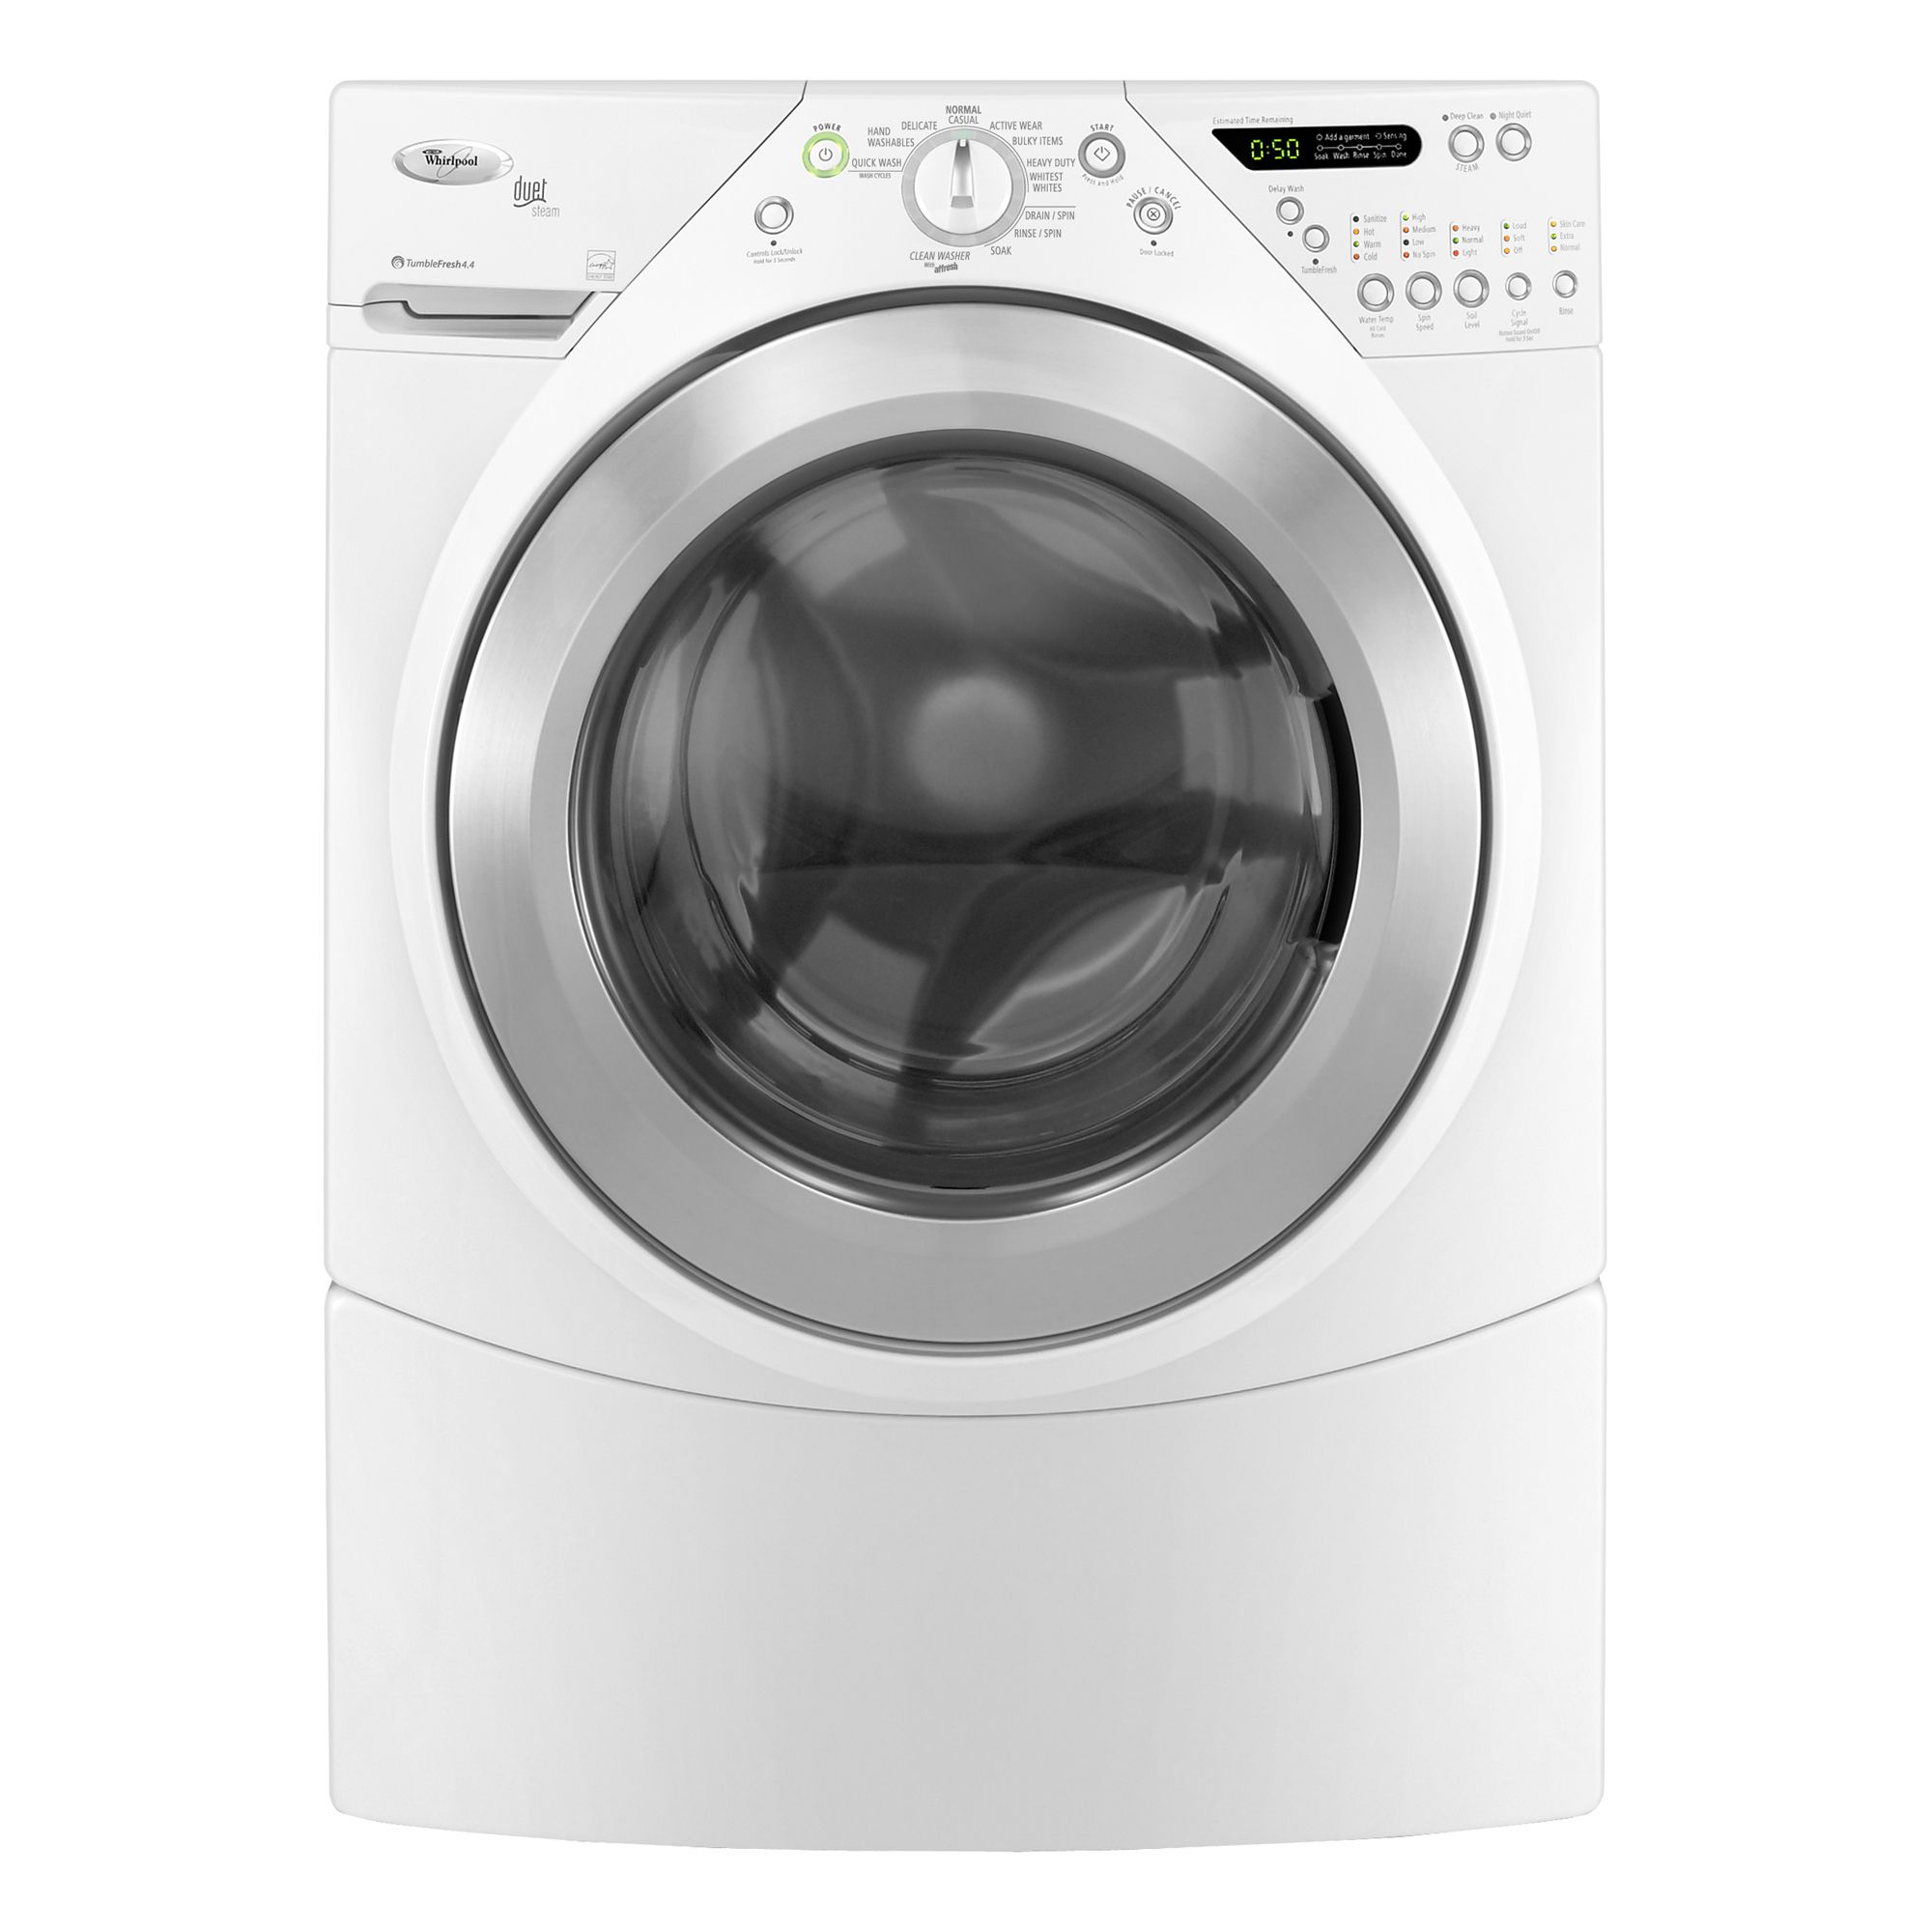 Whirlpool Duet 3.8 cu. ft. Steam Front-Load Washer